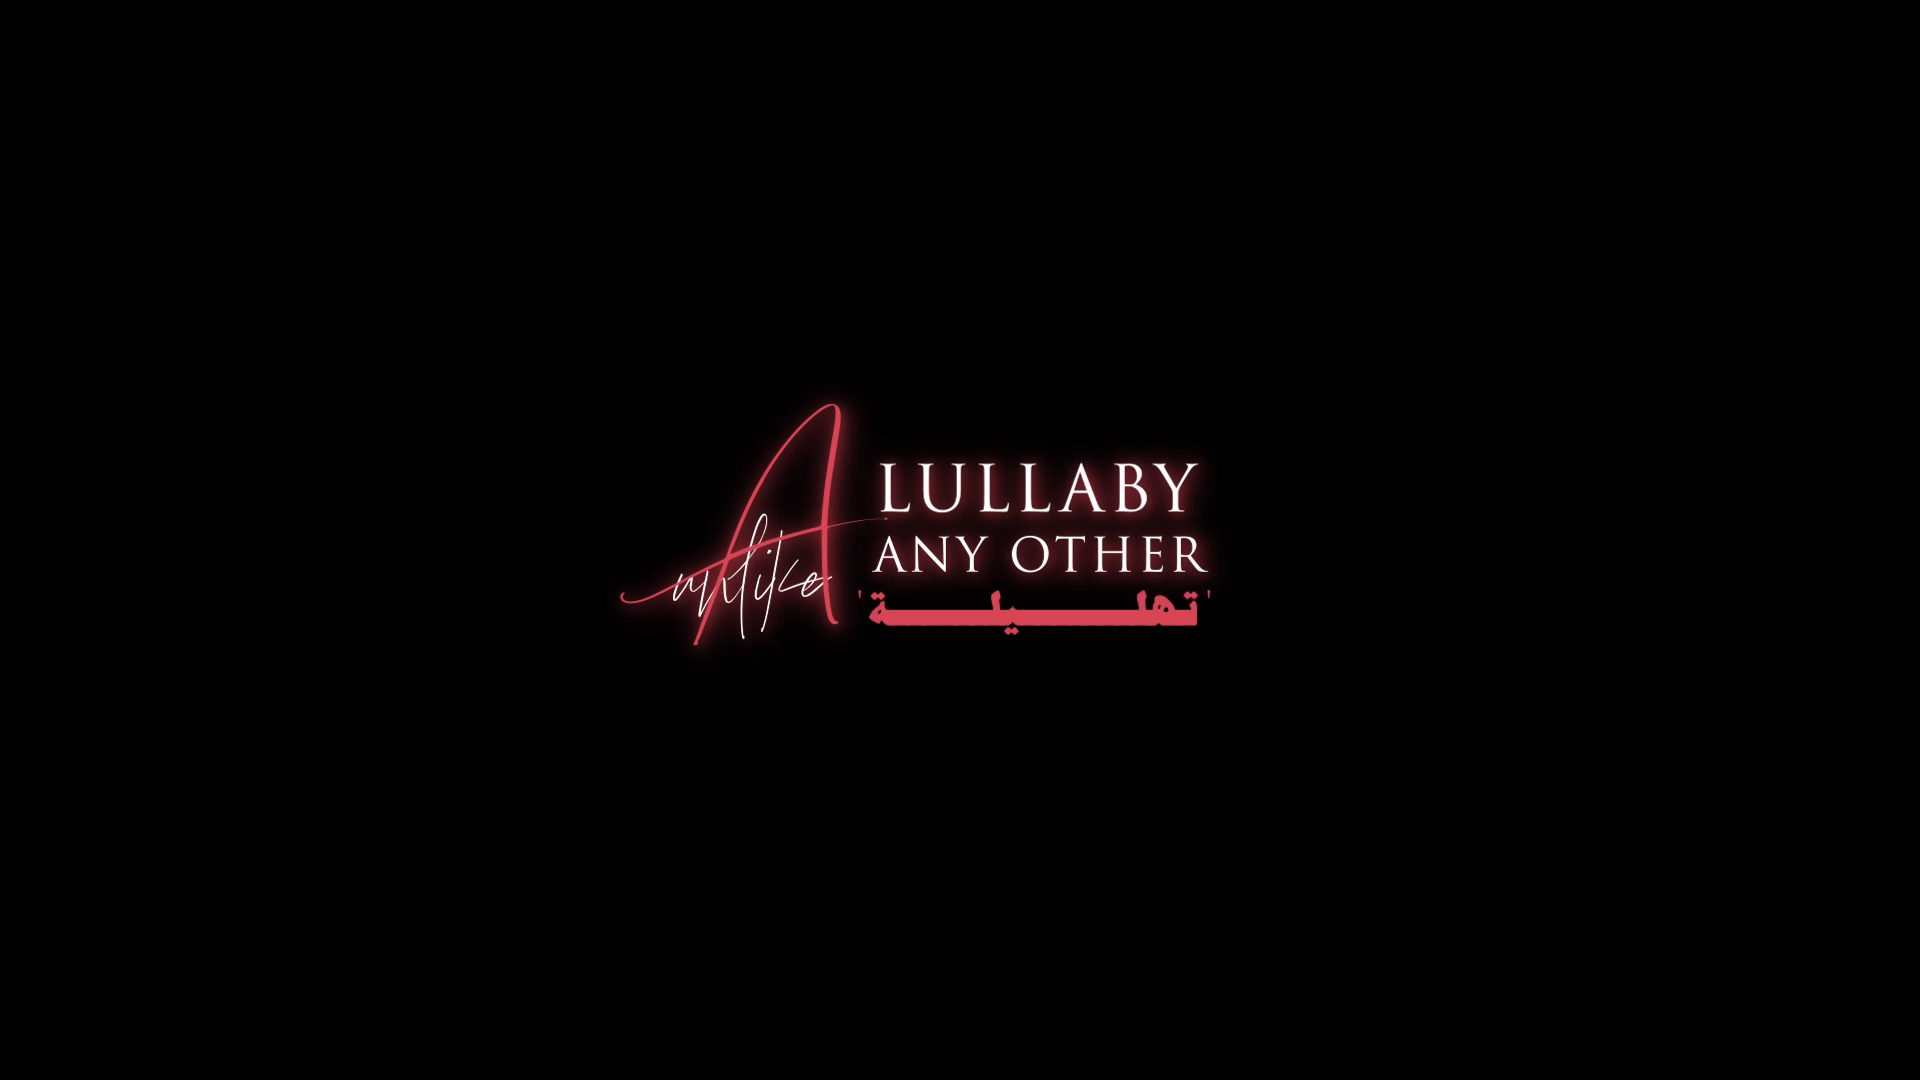 A Lullaby Unlike Any Other Film